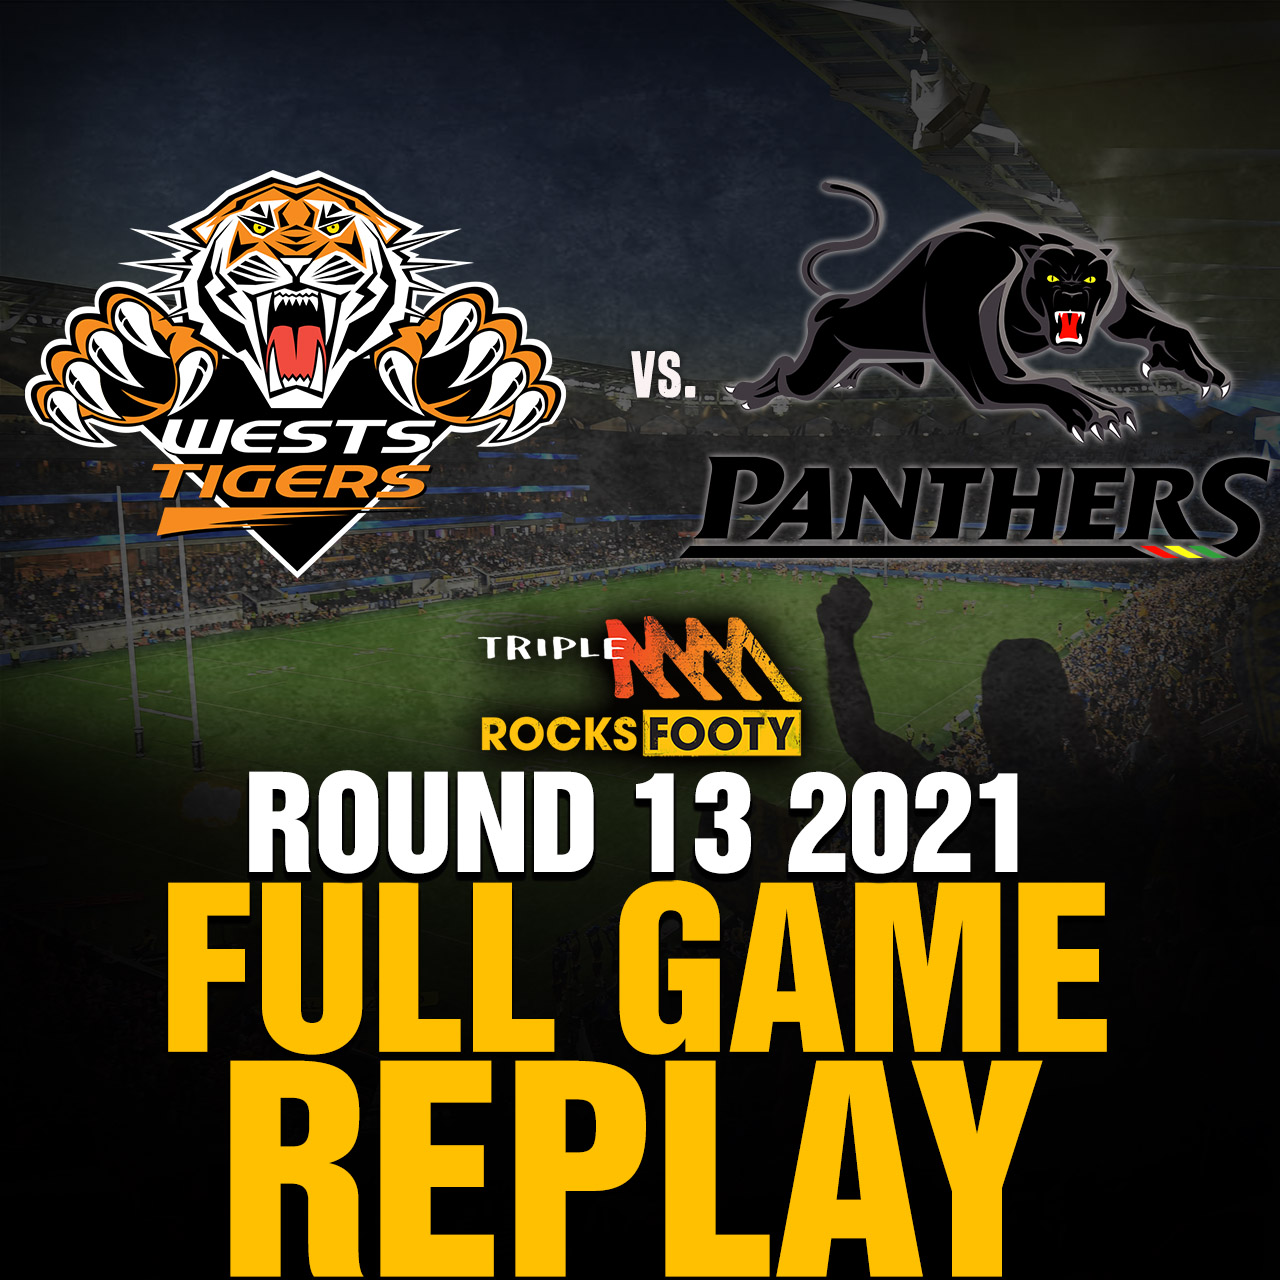 FULL GAME REPLAY | Wests Tigers vs. Penrith Panthers